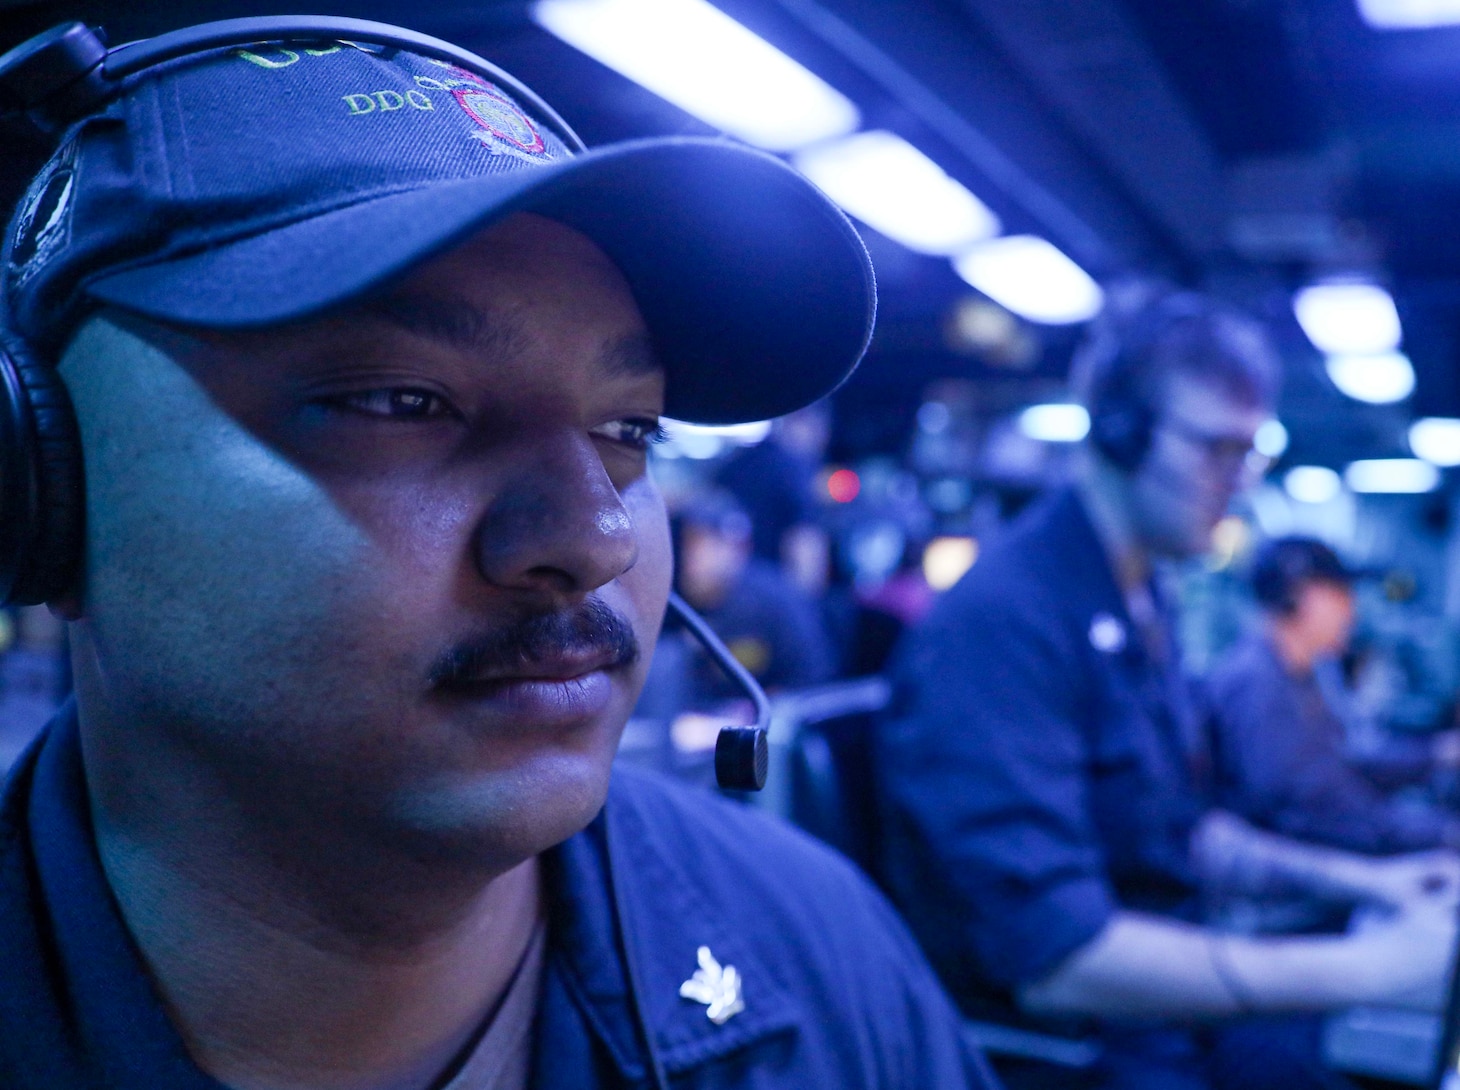 Fire Controlman (Aegis) 2nd Class Ordermos Ford, from Muscatine, Iowa, stands watch in the combat information center aboard the Arleigh Burke-class guided-missile destroyer USS Milius (DDG 69) while conducting routine underway operations. Milius is forward-deployed to the U.S. 7th Fleet area of operations in support of a free and open Indo-Pacific.